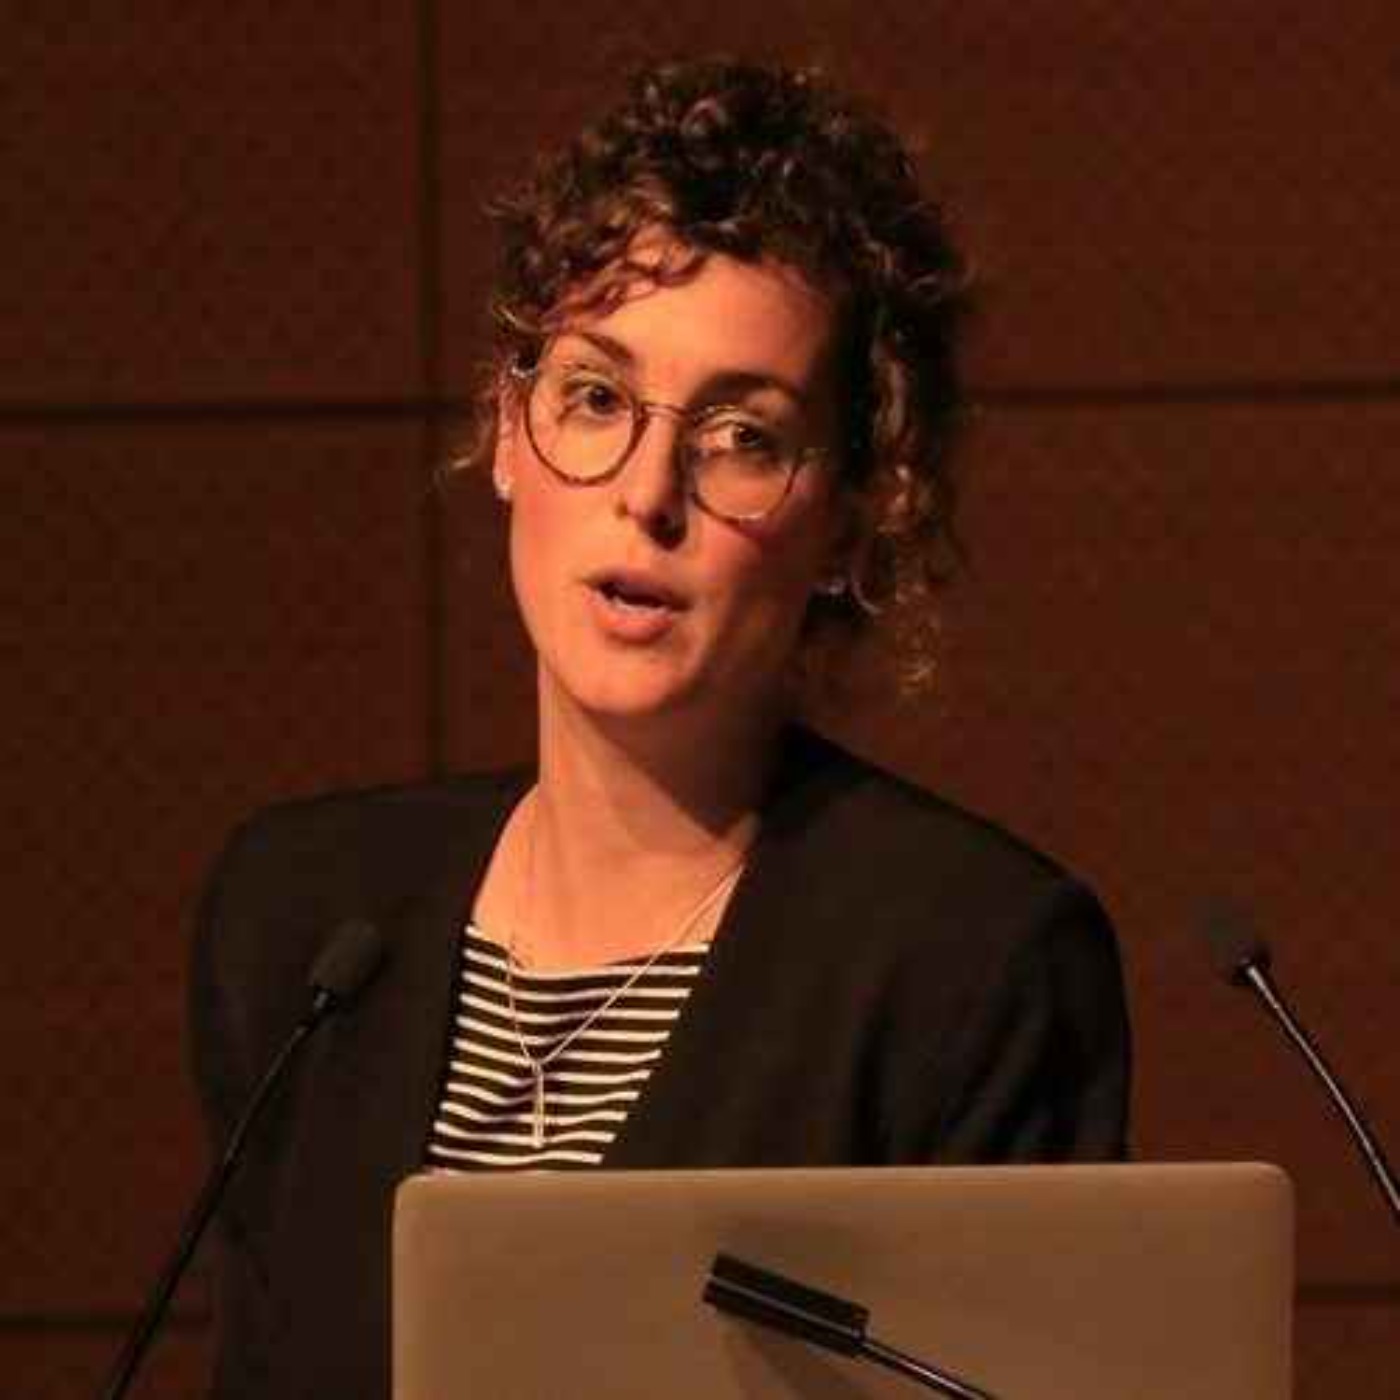 AUSTERITY: A WEAPON TO DISCIPLINE THE PUBLIC? - with Dr. Clara Mattei